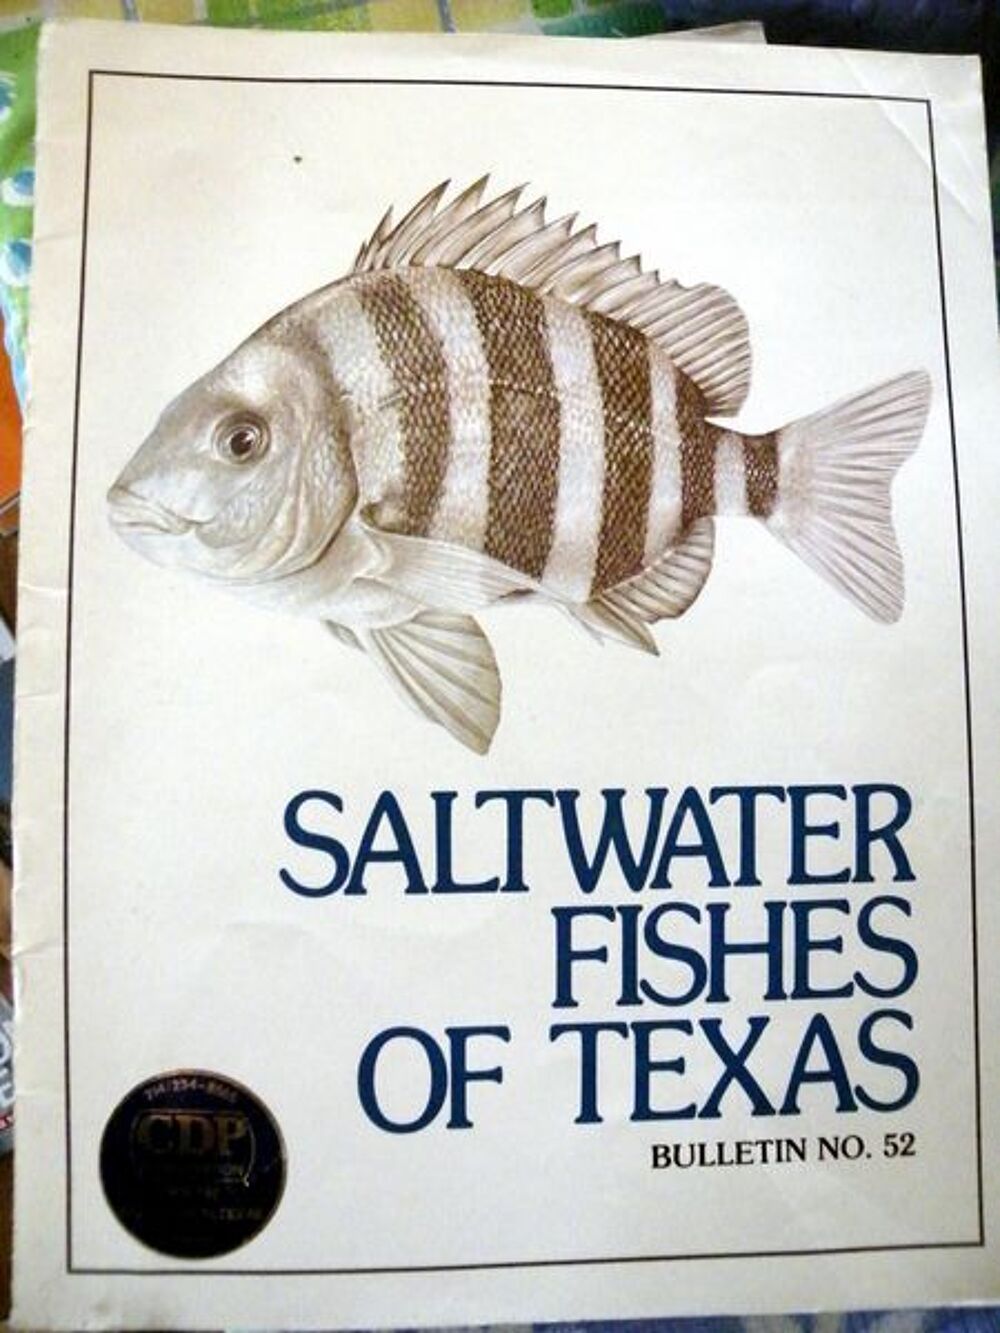 saltwater fishes of texas Livres et BD